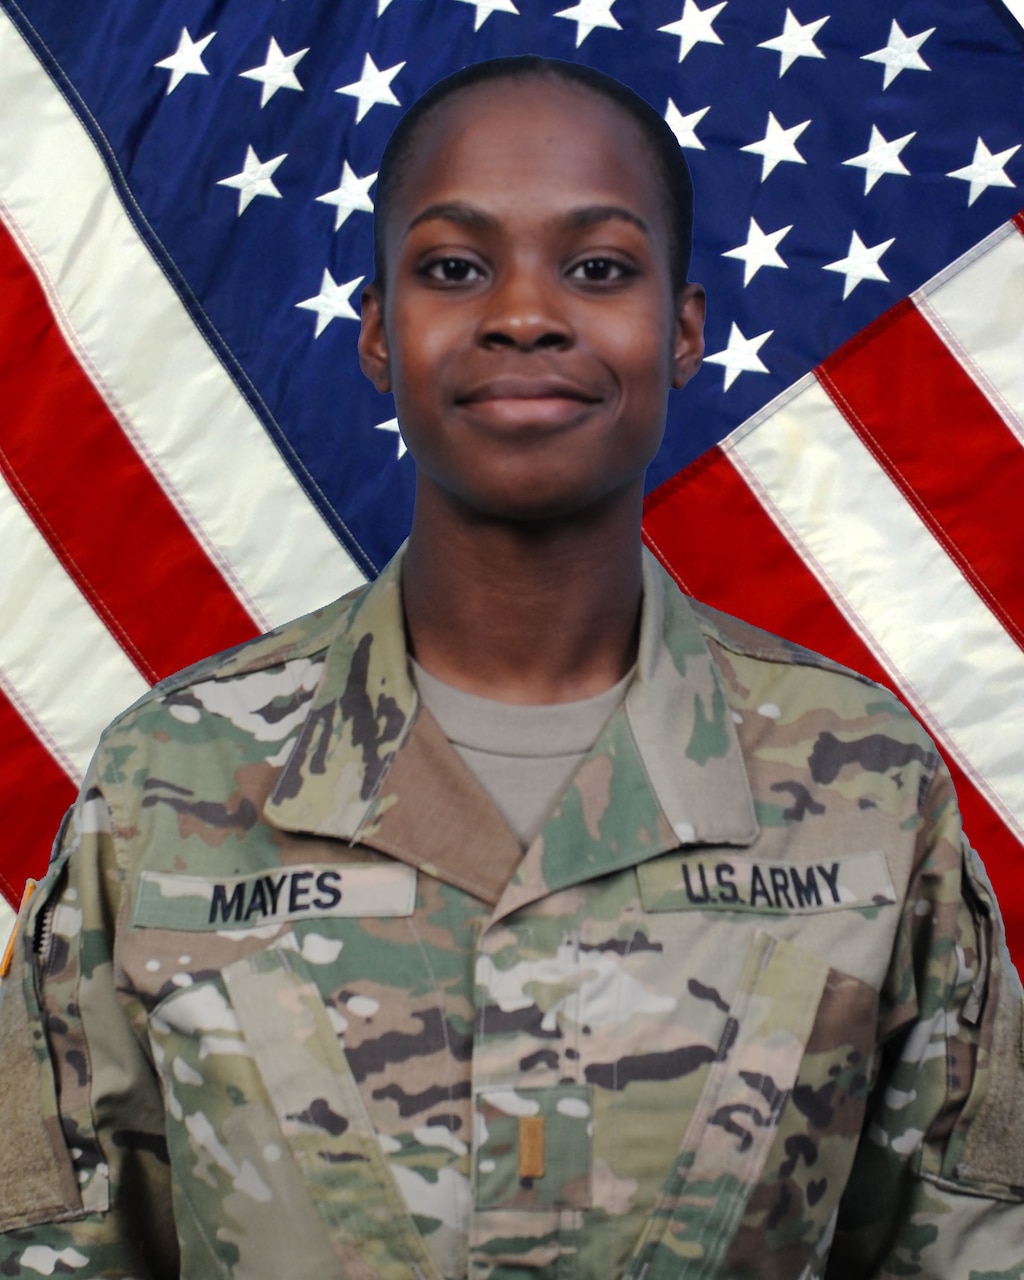 Army 2nd Lt. Lasheri Mayes has volunteered to become an infantry officer in the New York Army National Guard's 2nd Battalion, 108th Infantry Regiment, 27th Infantry Brigade Combat Team. The Army requires that female leaders be in place before enlisted women can join combat arms units. National Guard photo by Eric Durr